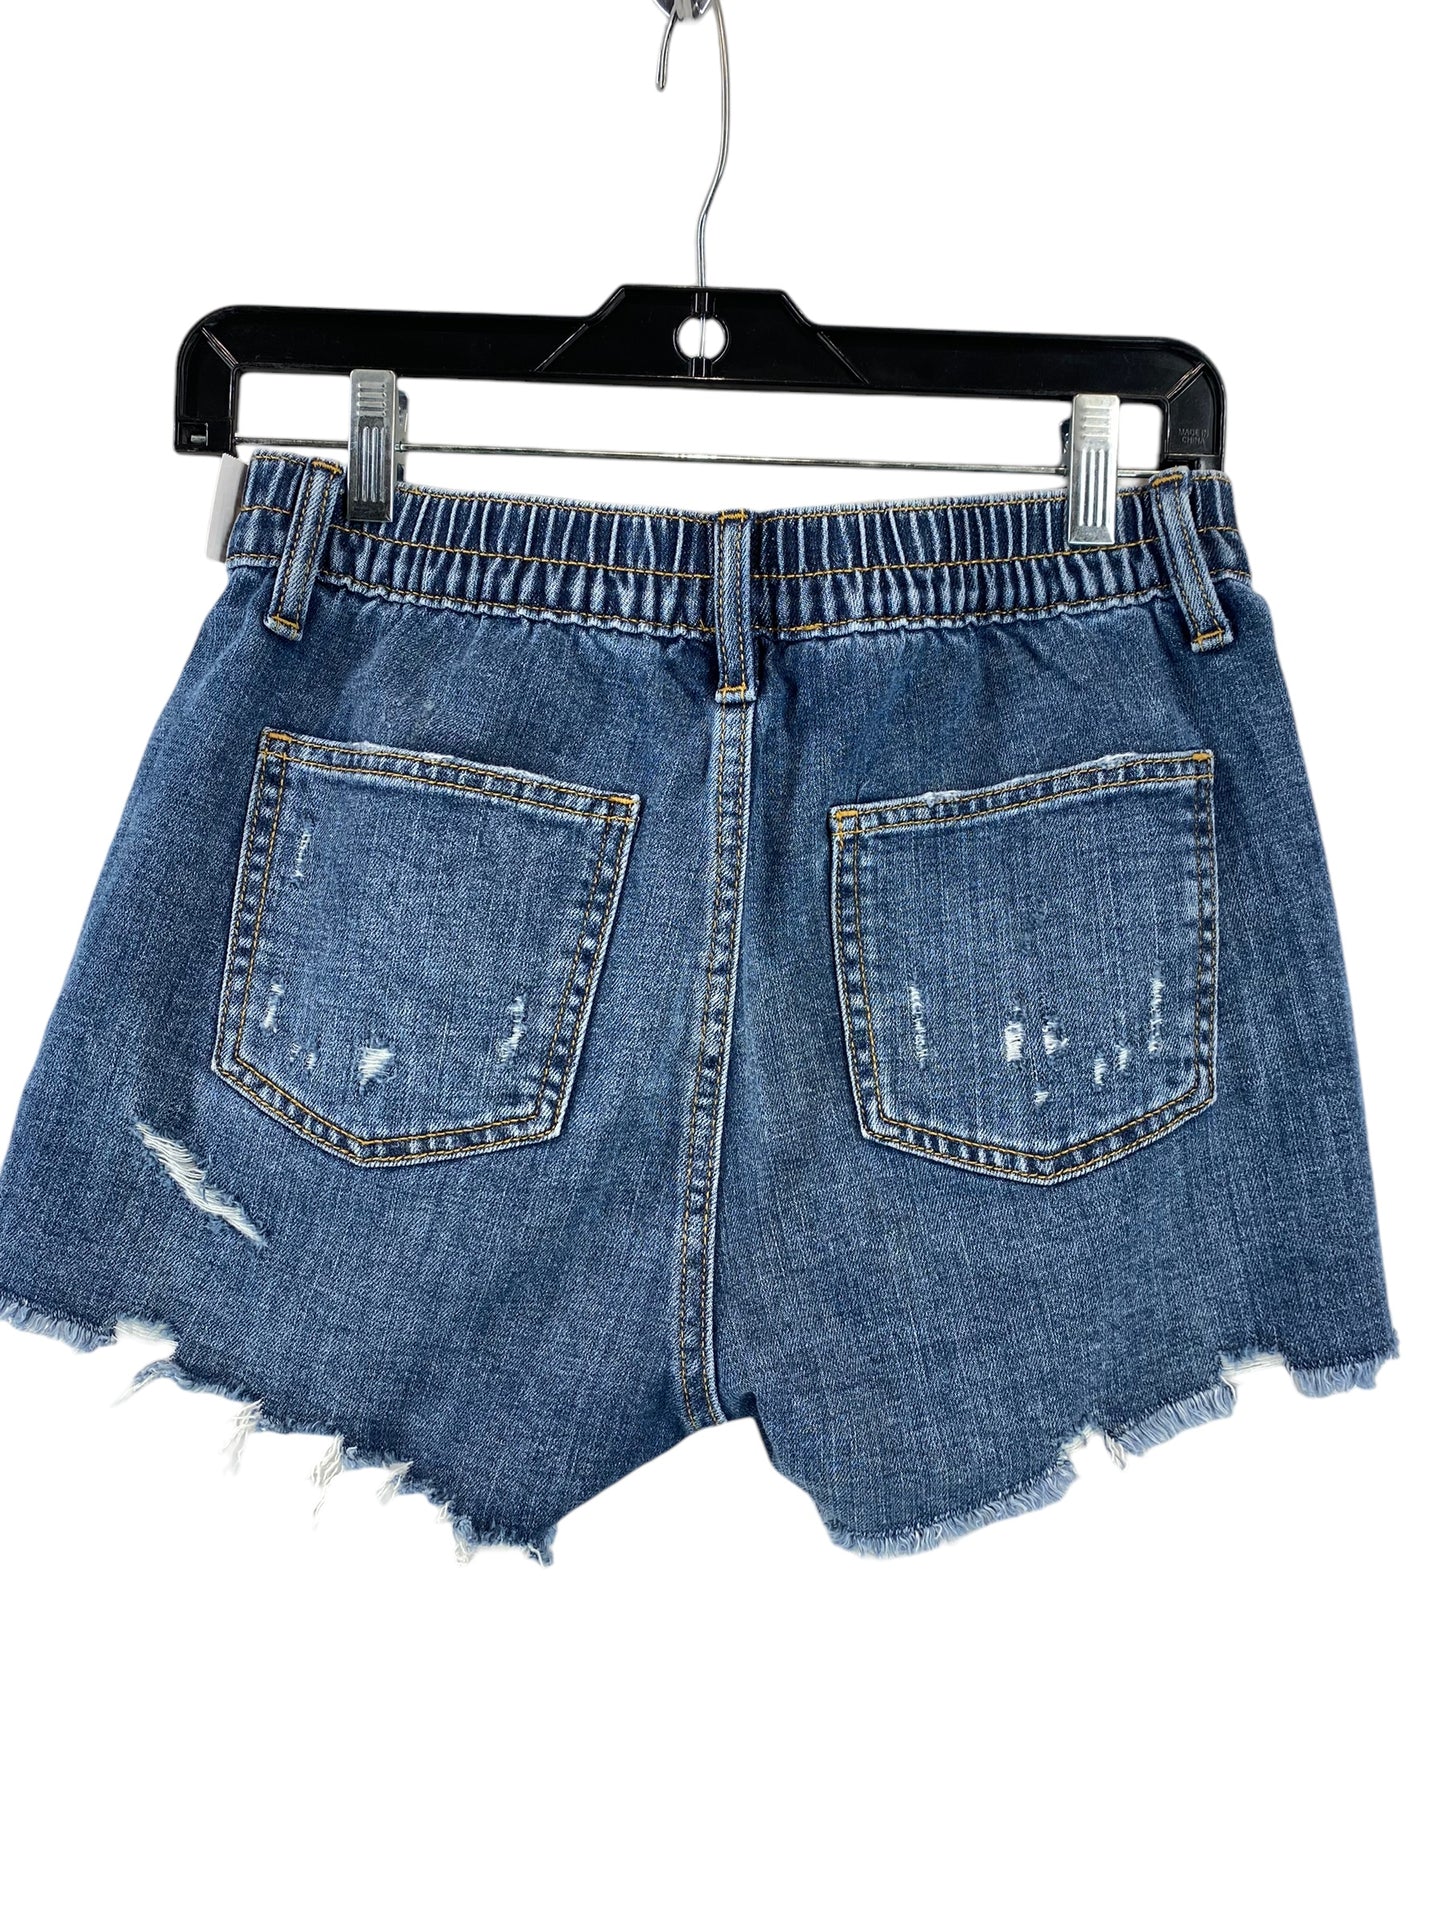 Shorts By Aerie  Size: Xs